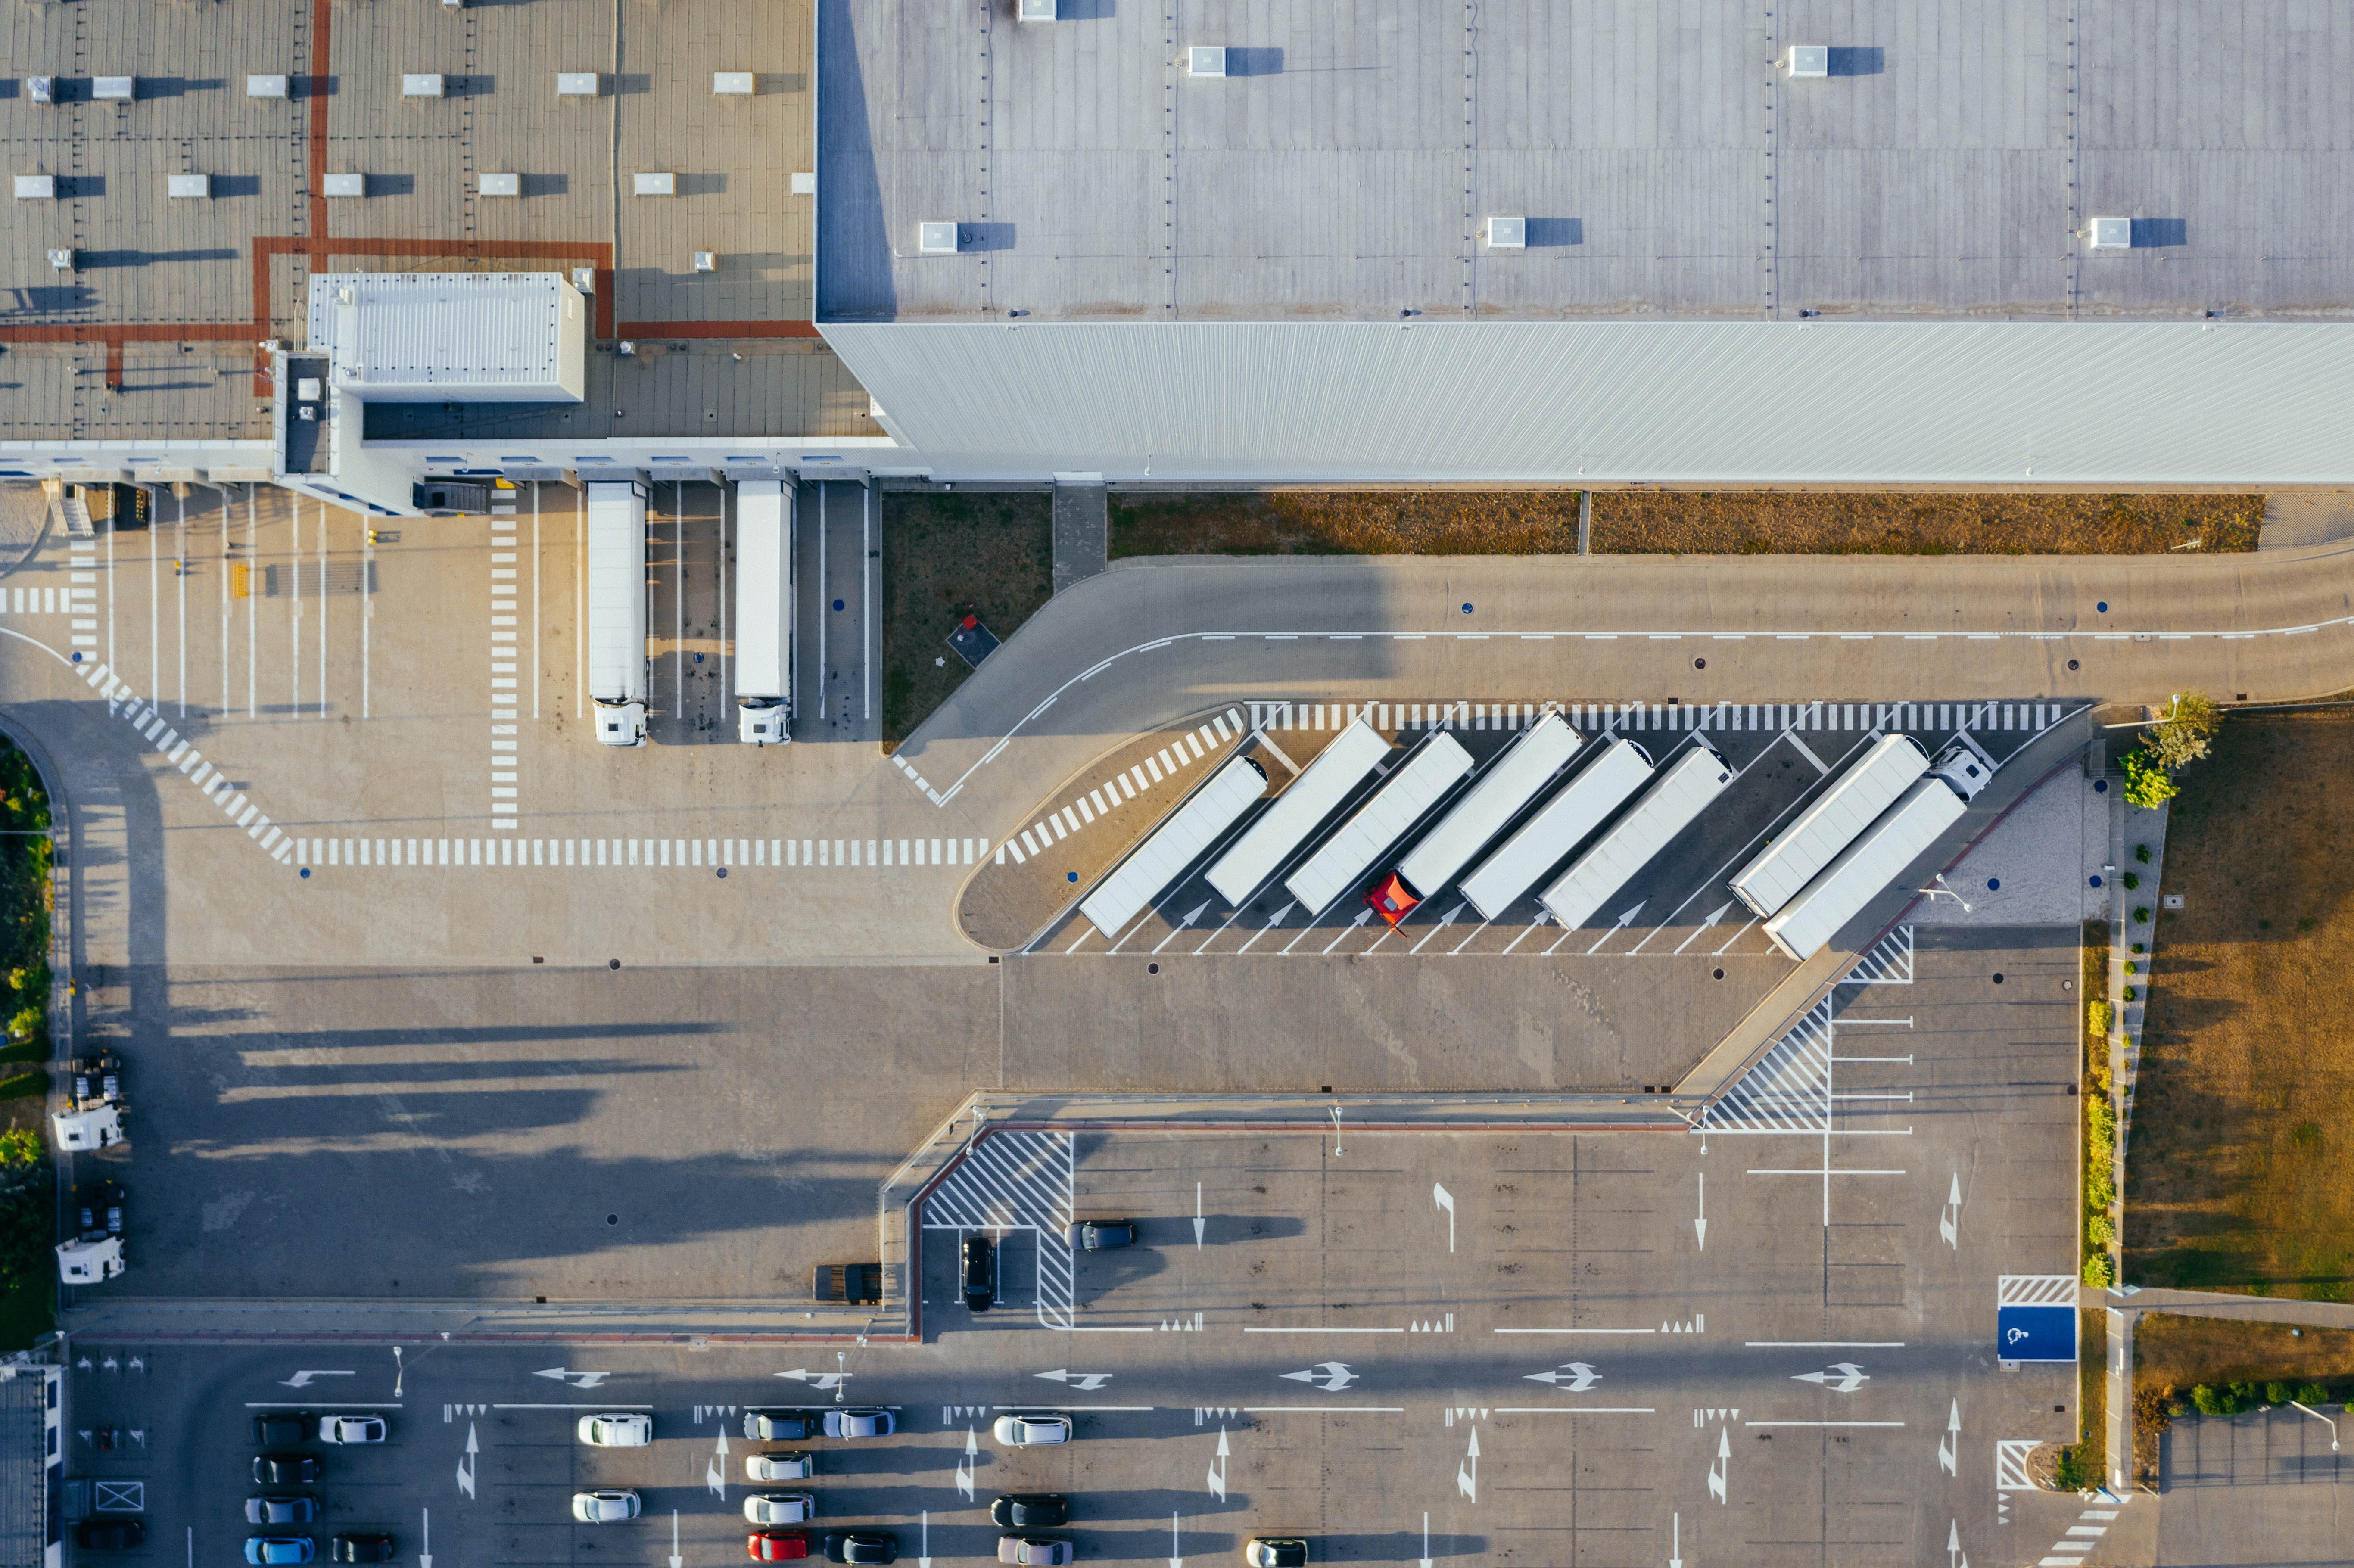 Aerial shot of a trucking depot with several trucks parked